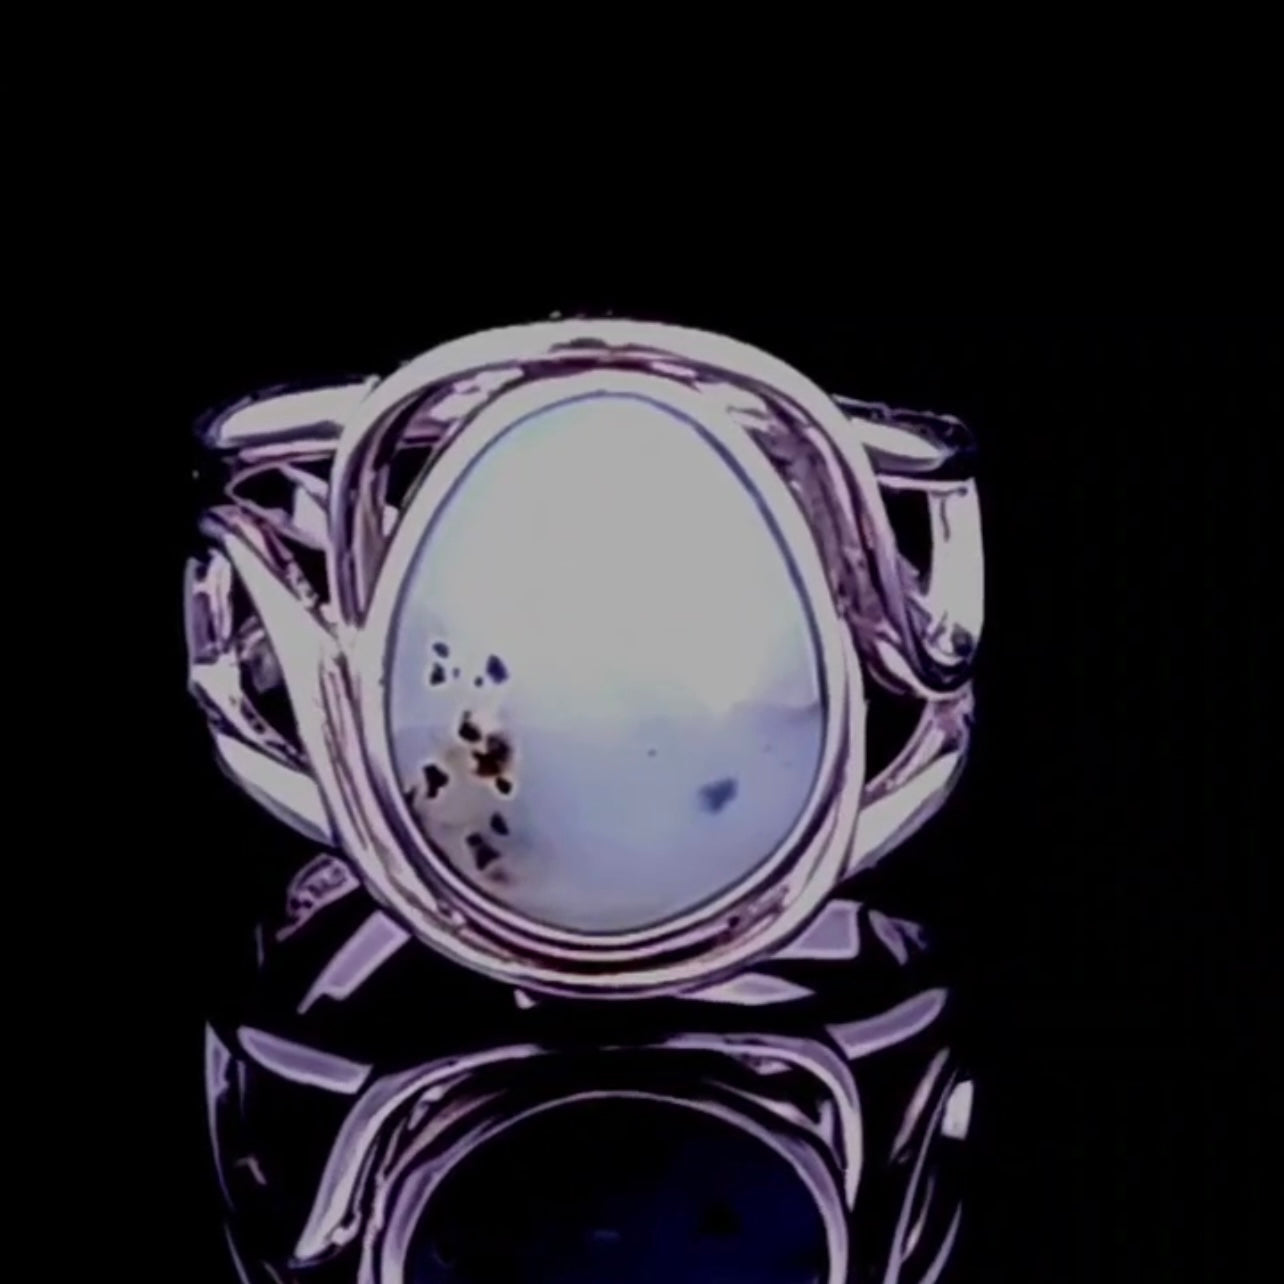 Dendritic Blue Opal Finger Cuff Adjustable Ring .925 Silver for Calming the Mind and Peaceful Communication